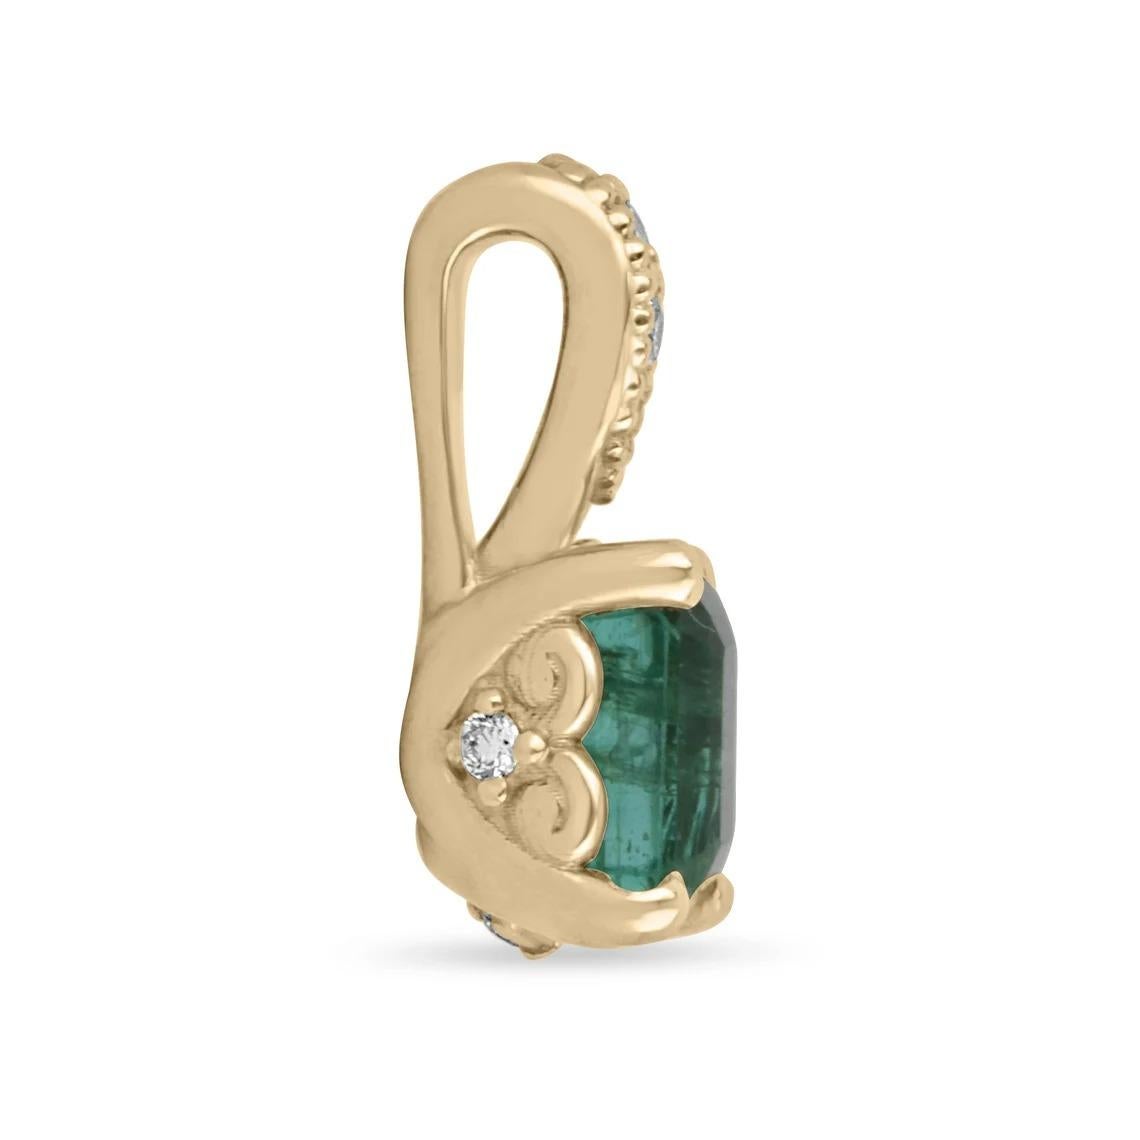 A dainty 0.83tcw natural emerald and diamond accent necklace. Crafted in solid 14K yellow gold, this piece is sure to make a statement. The center gemstone is an earth-mined natural emerald that is handset in a secure four-prong setting. This gem